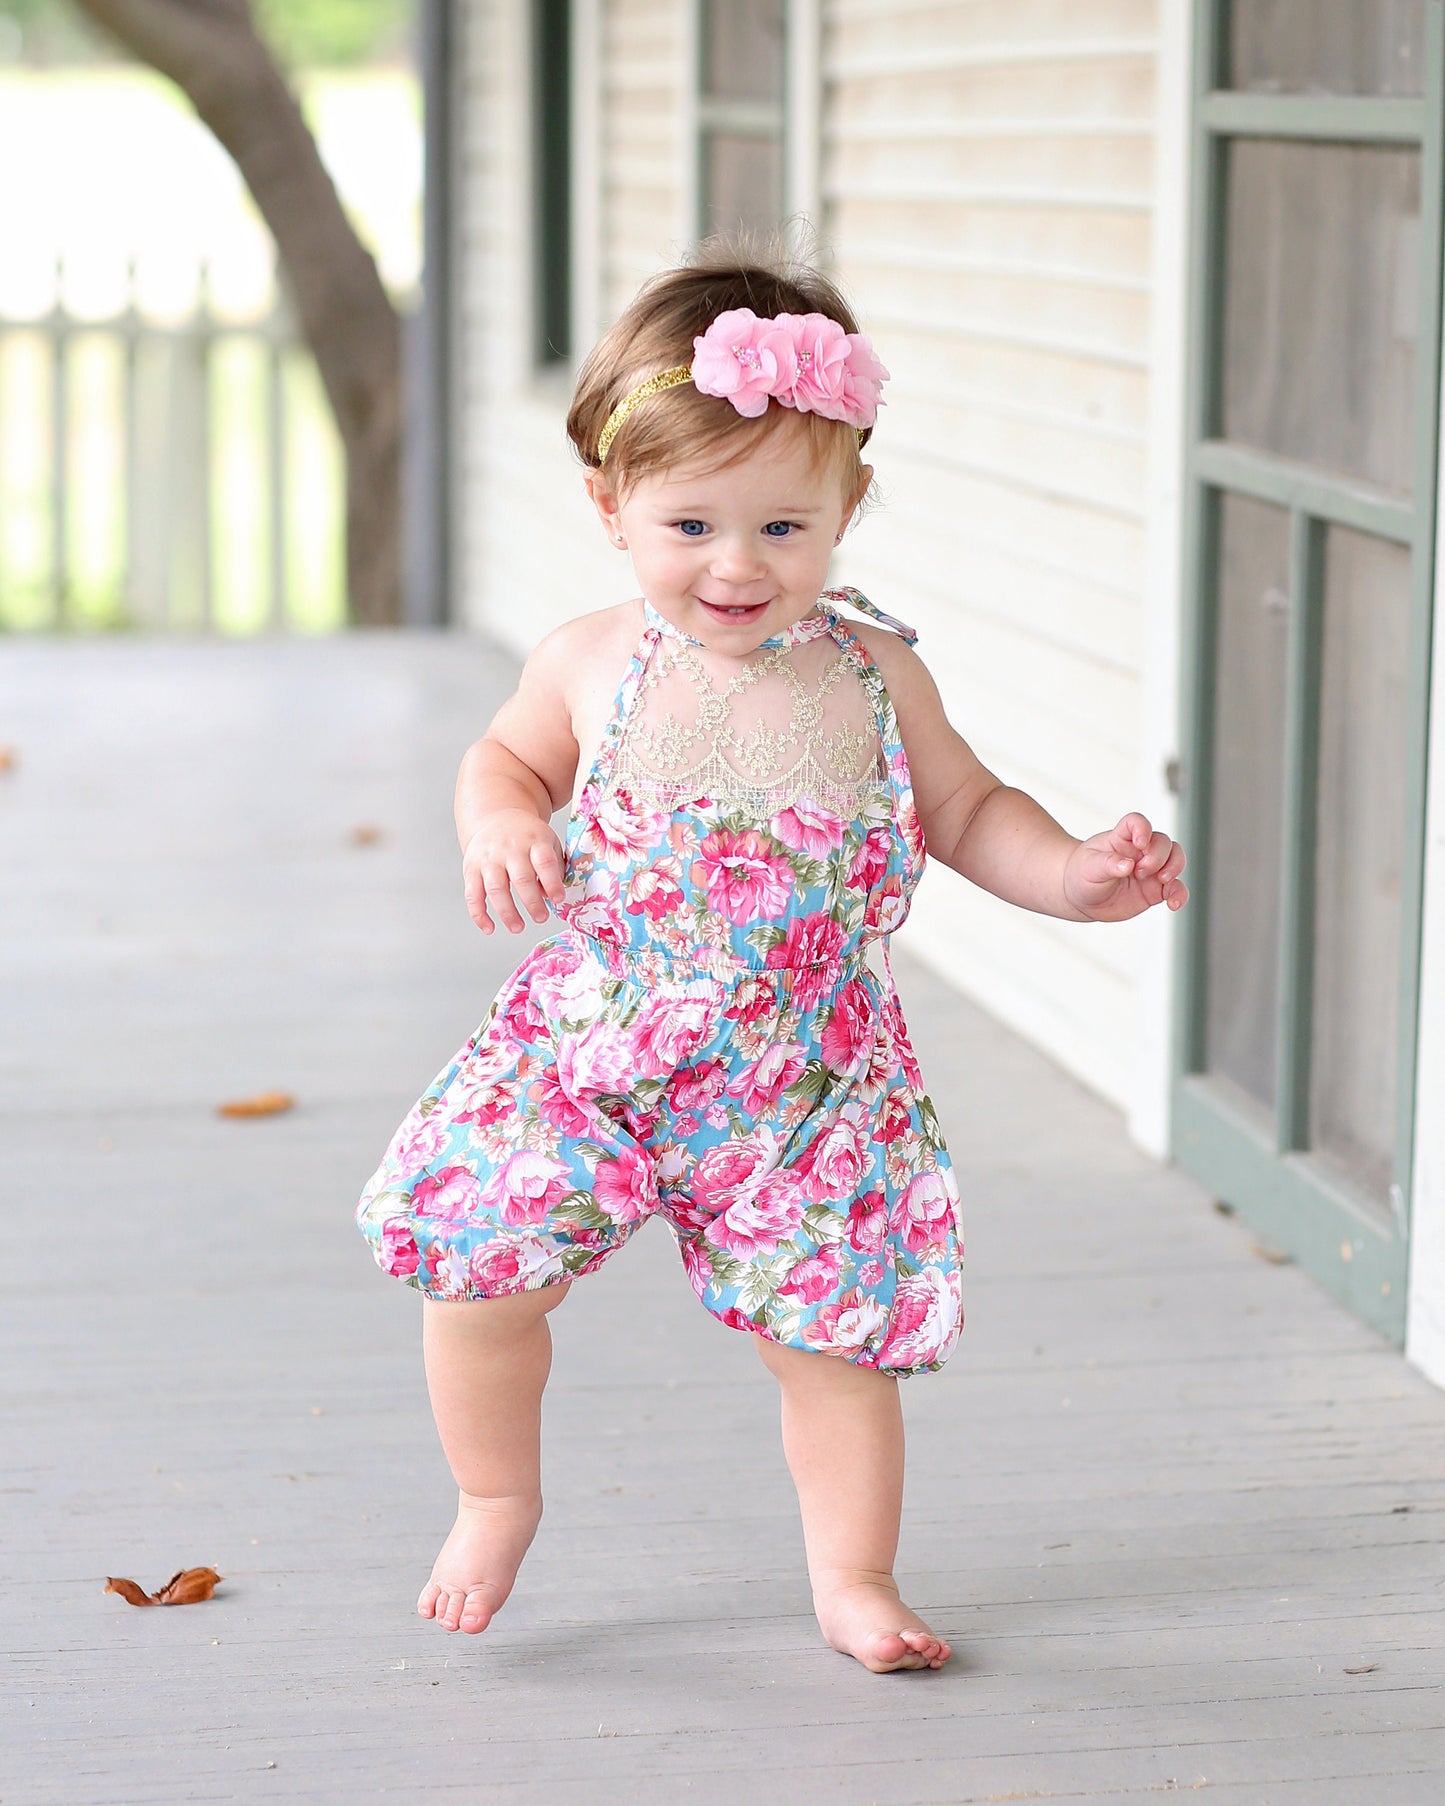 Teal Floral Baby Toddler Romper- Baby Gift, Toddler Romper, Baby Gift, Toddler Gift, Toddler Outfit, Baby Outfit, Girl Birthday Gift, Baby